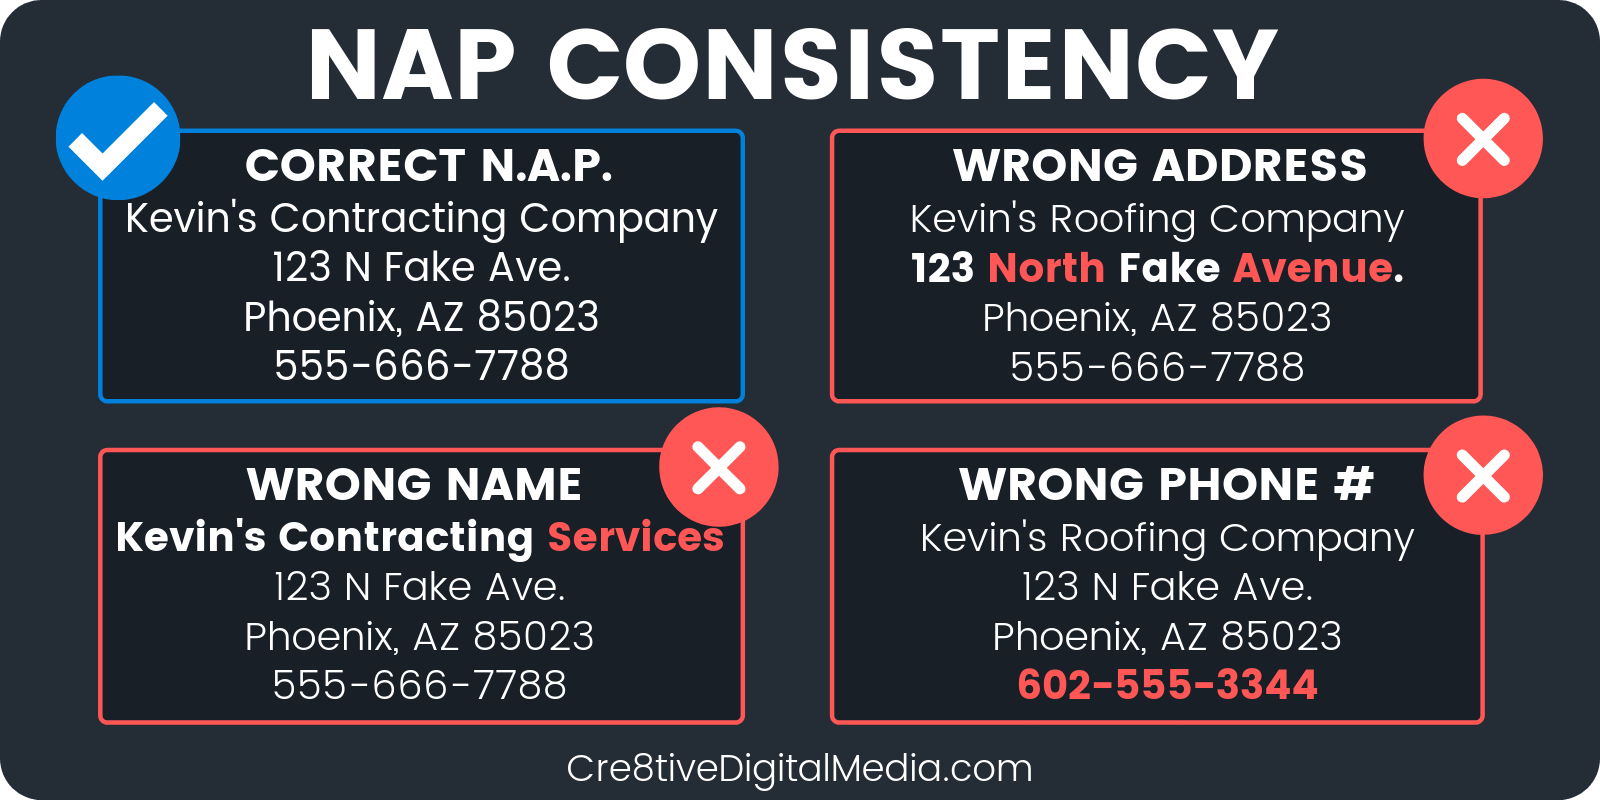 NAP Consistency Affects Local SEO Rankings